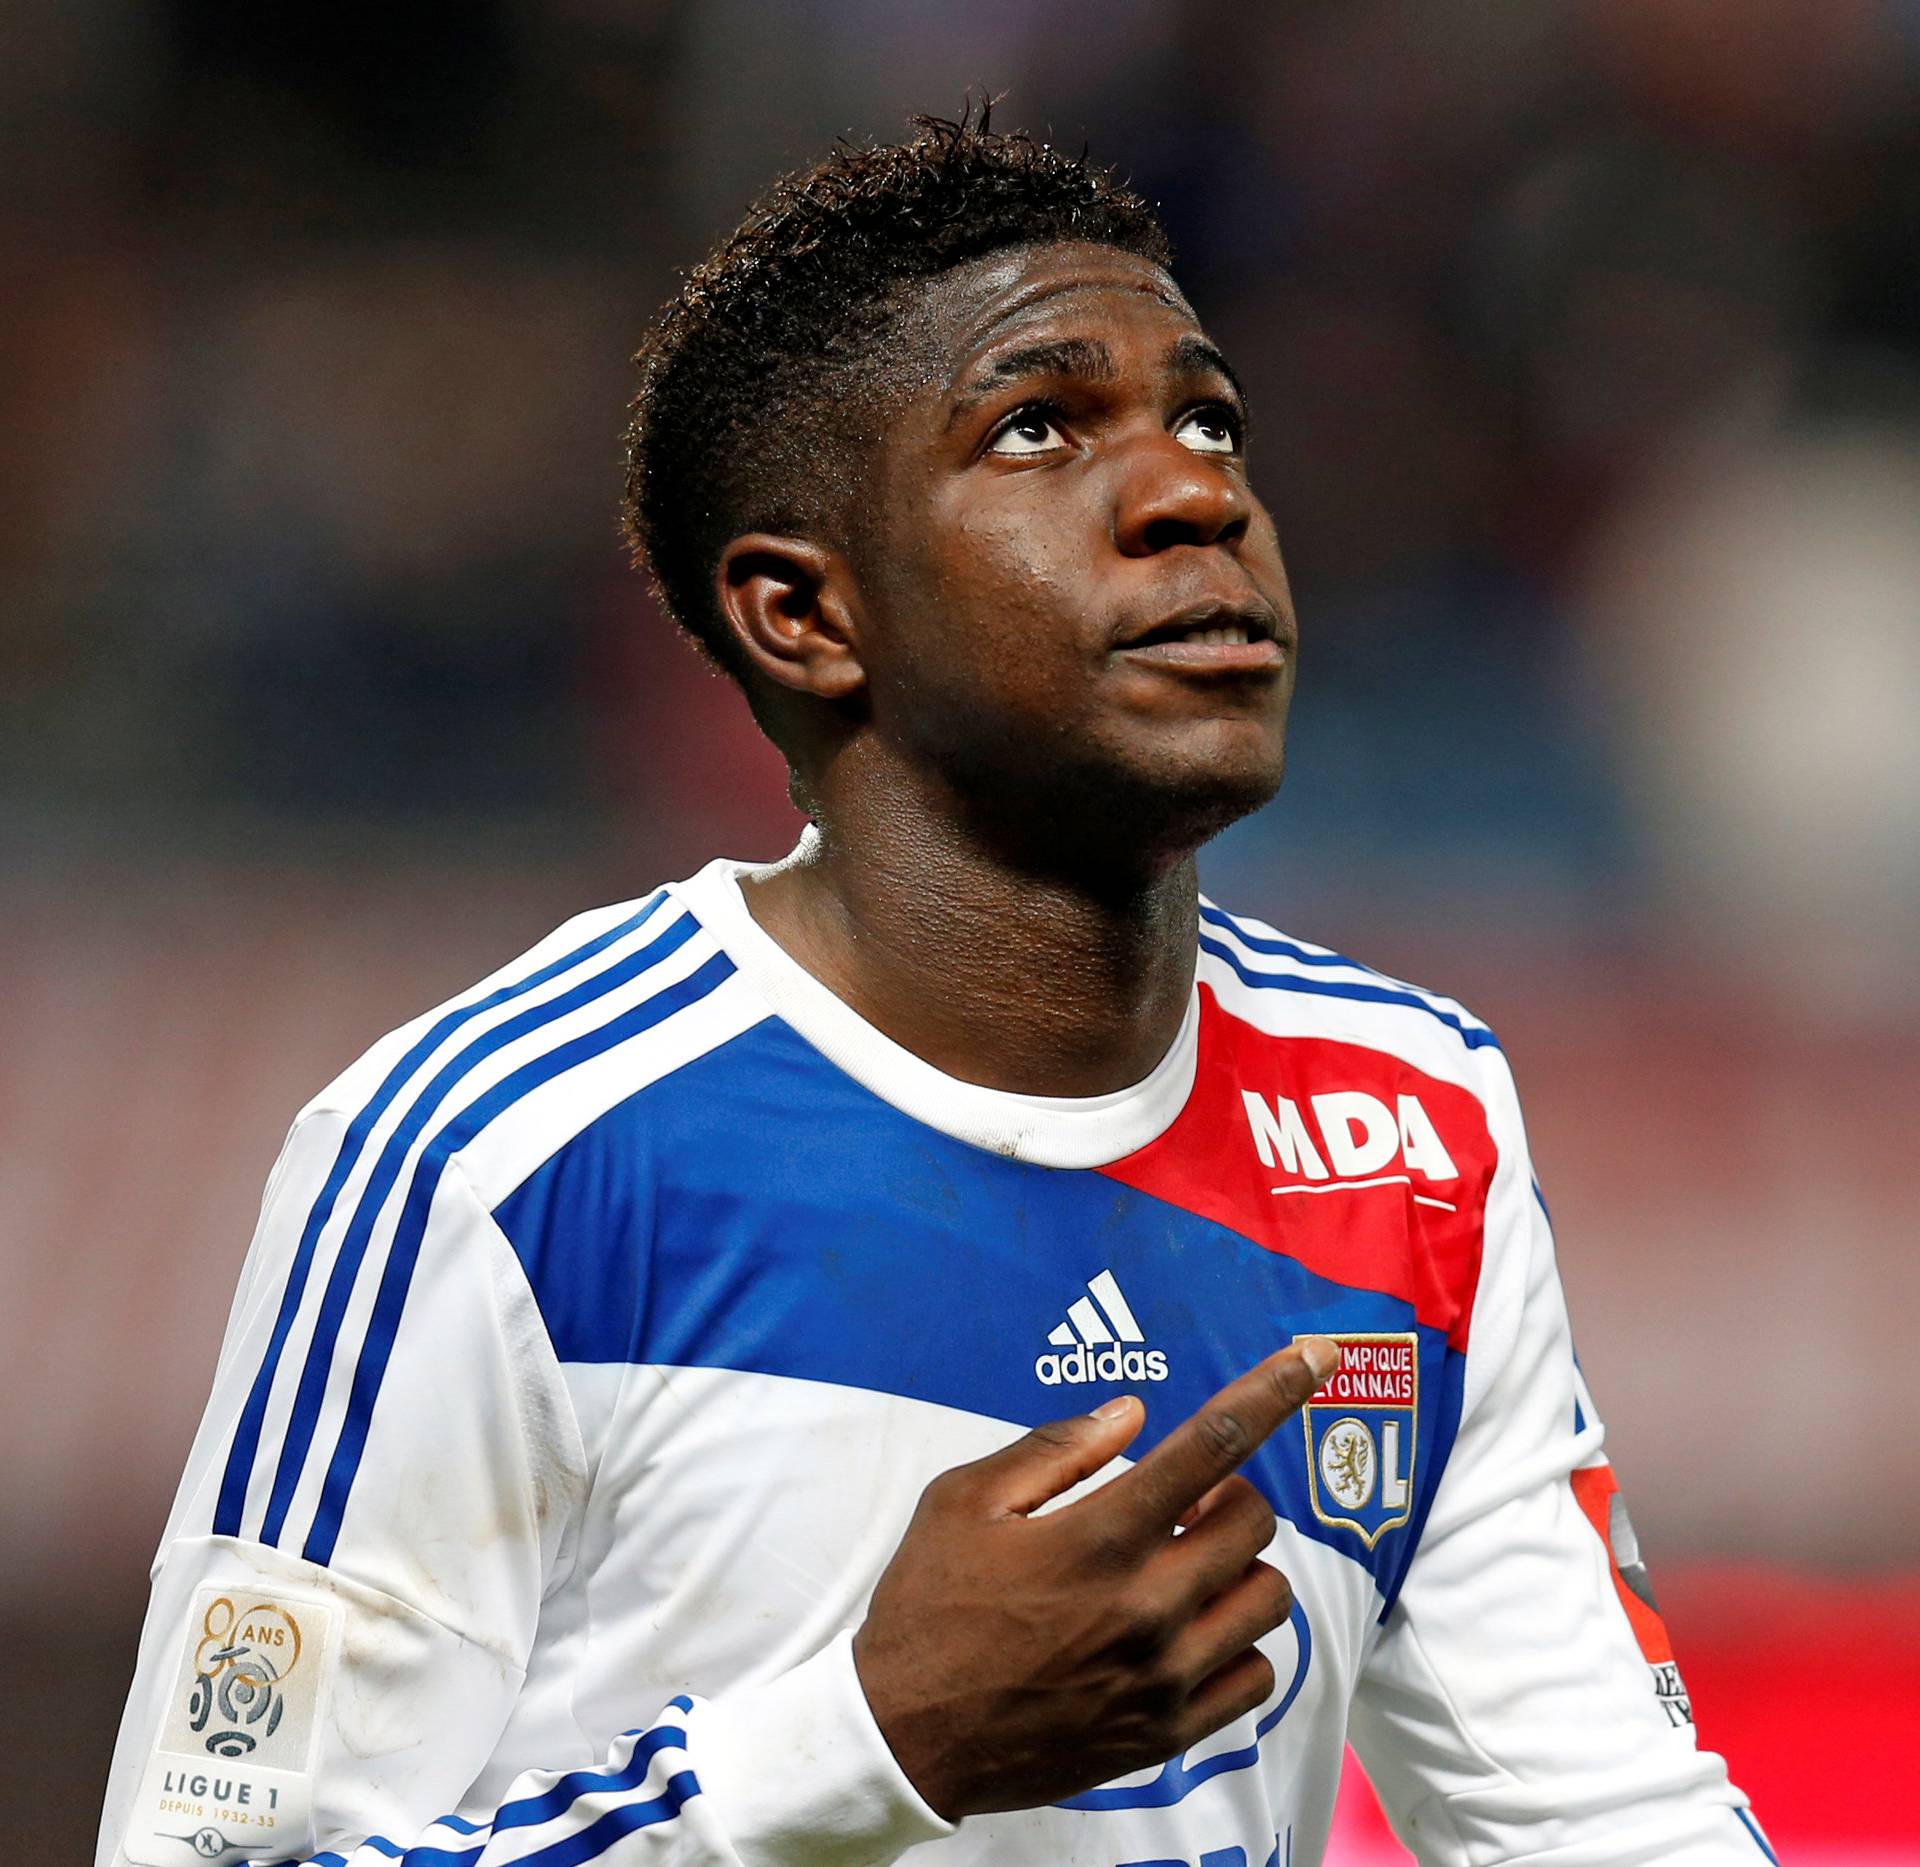 Olympique Lyon's Umtiti celebrates after scoring a goal against Troyes during their French Ligue 1 soccer match at the Stade de l'Aube stadium in Troyes